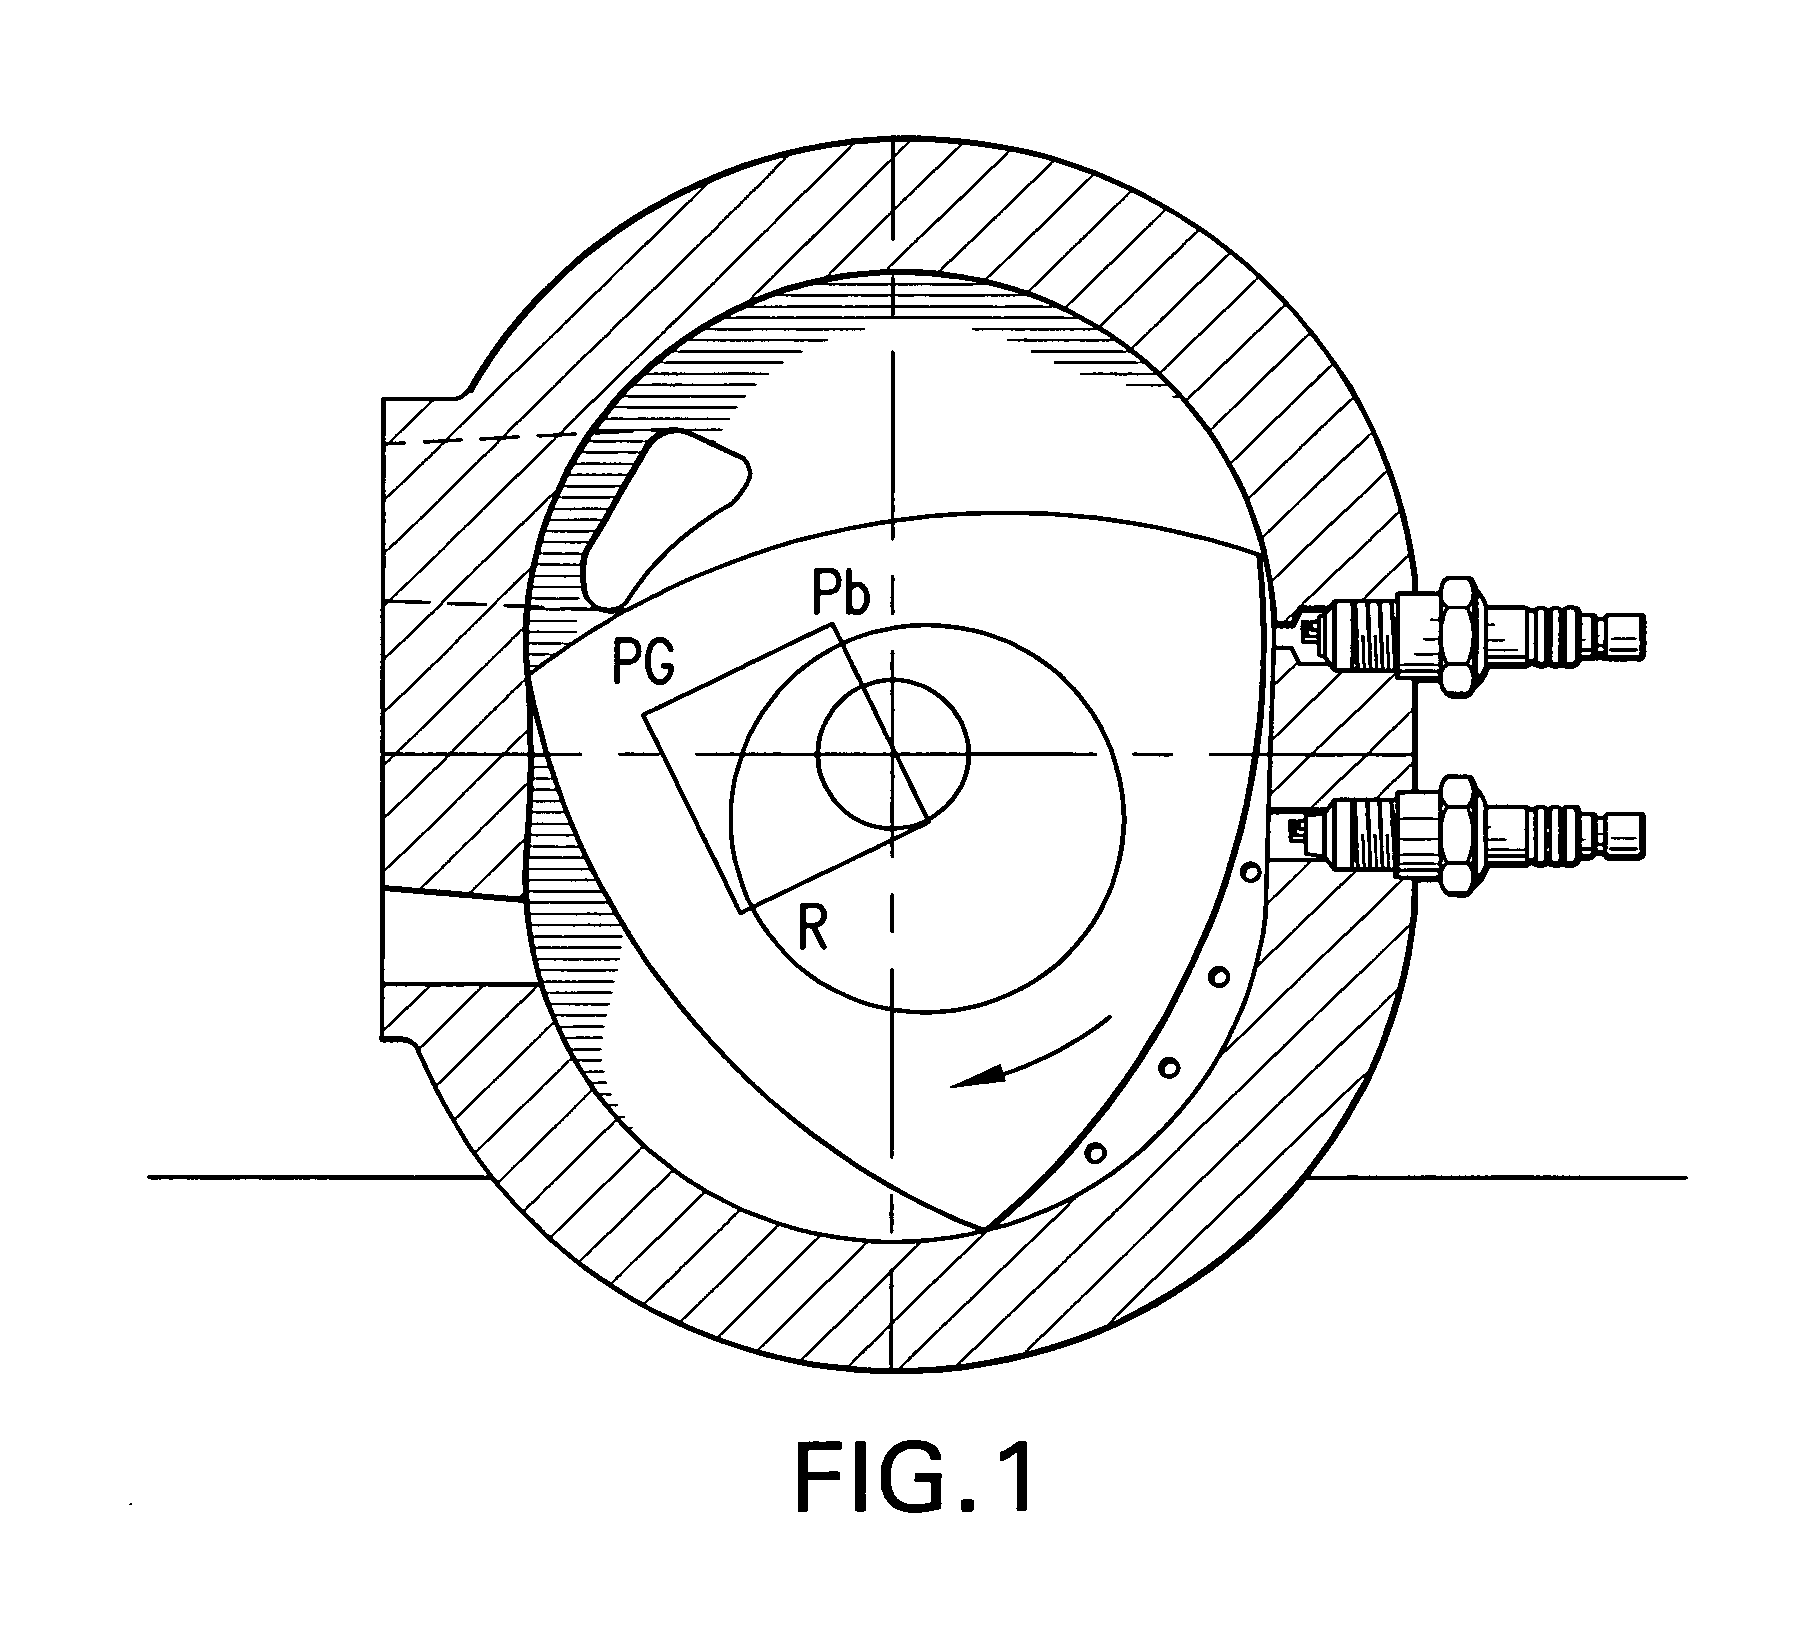 System and method for customizing a rotary engine for marine vessel propulsion